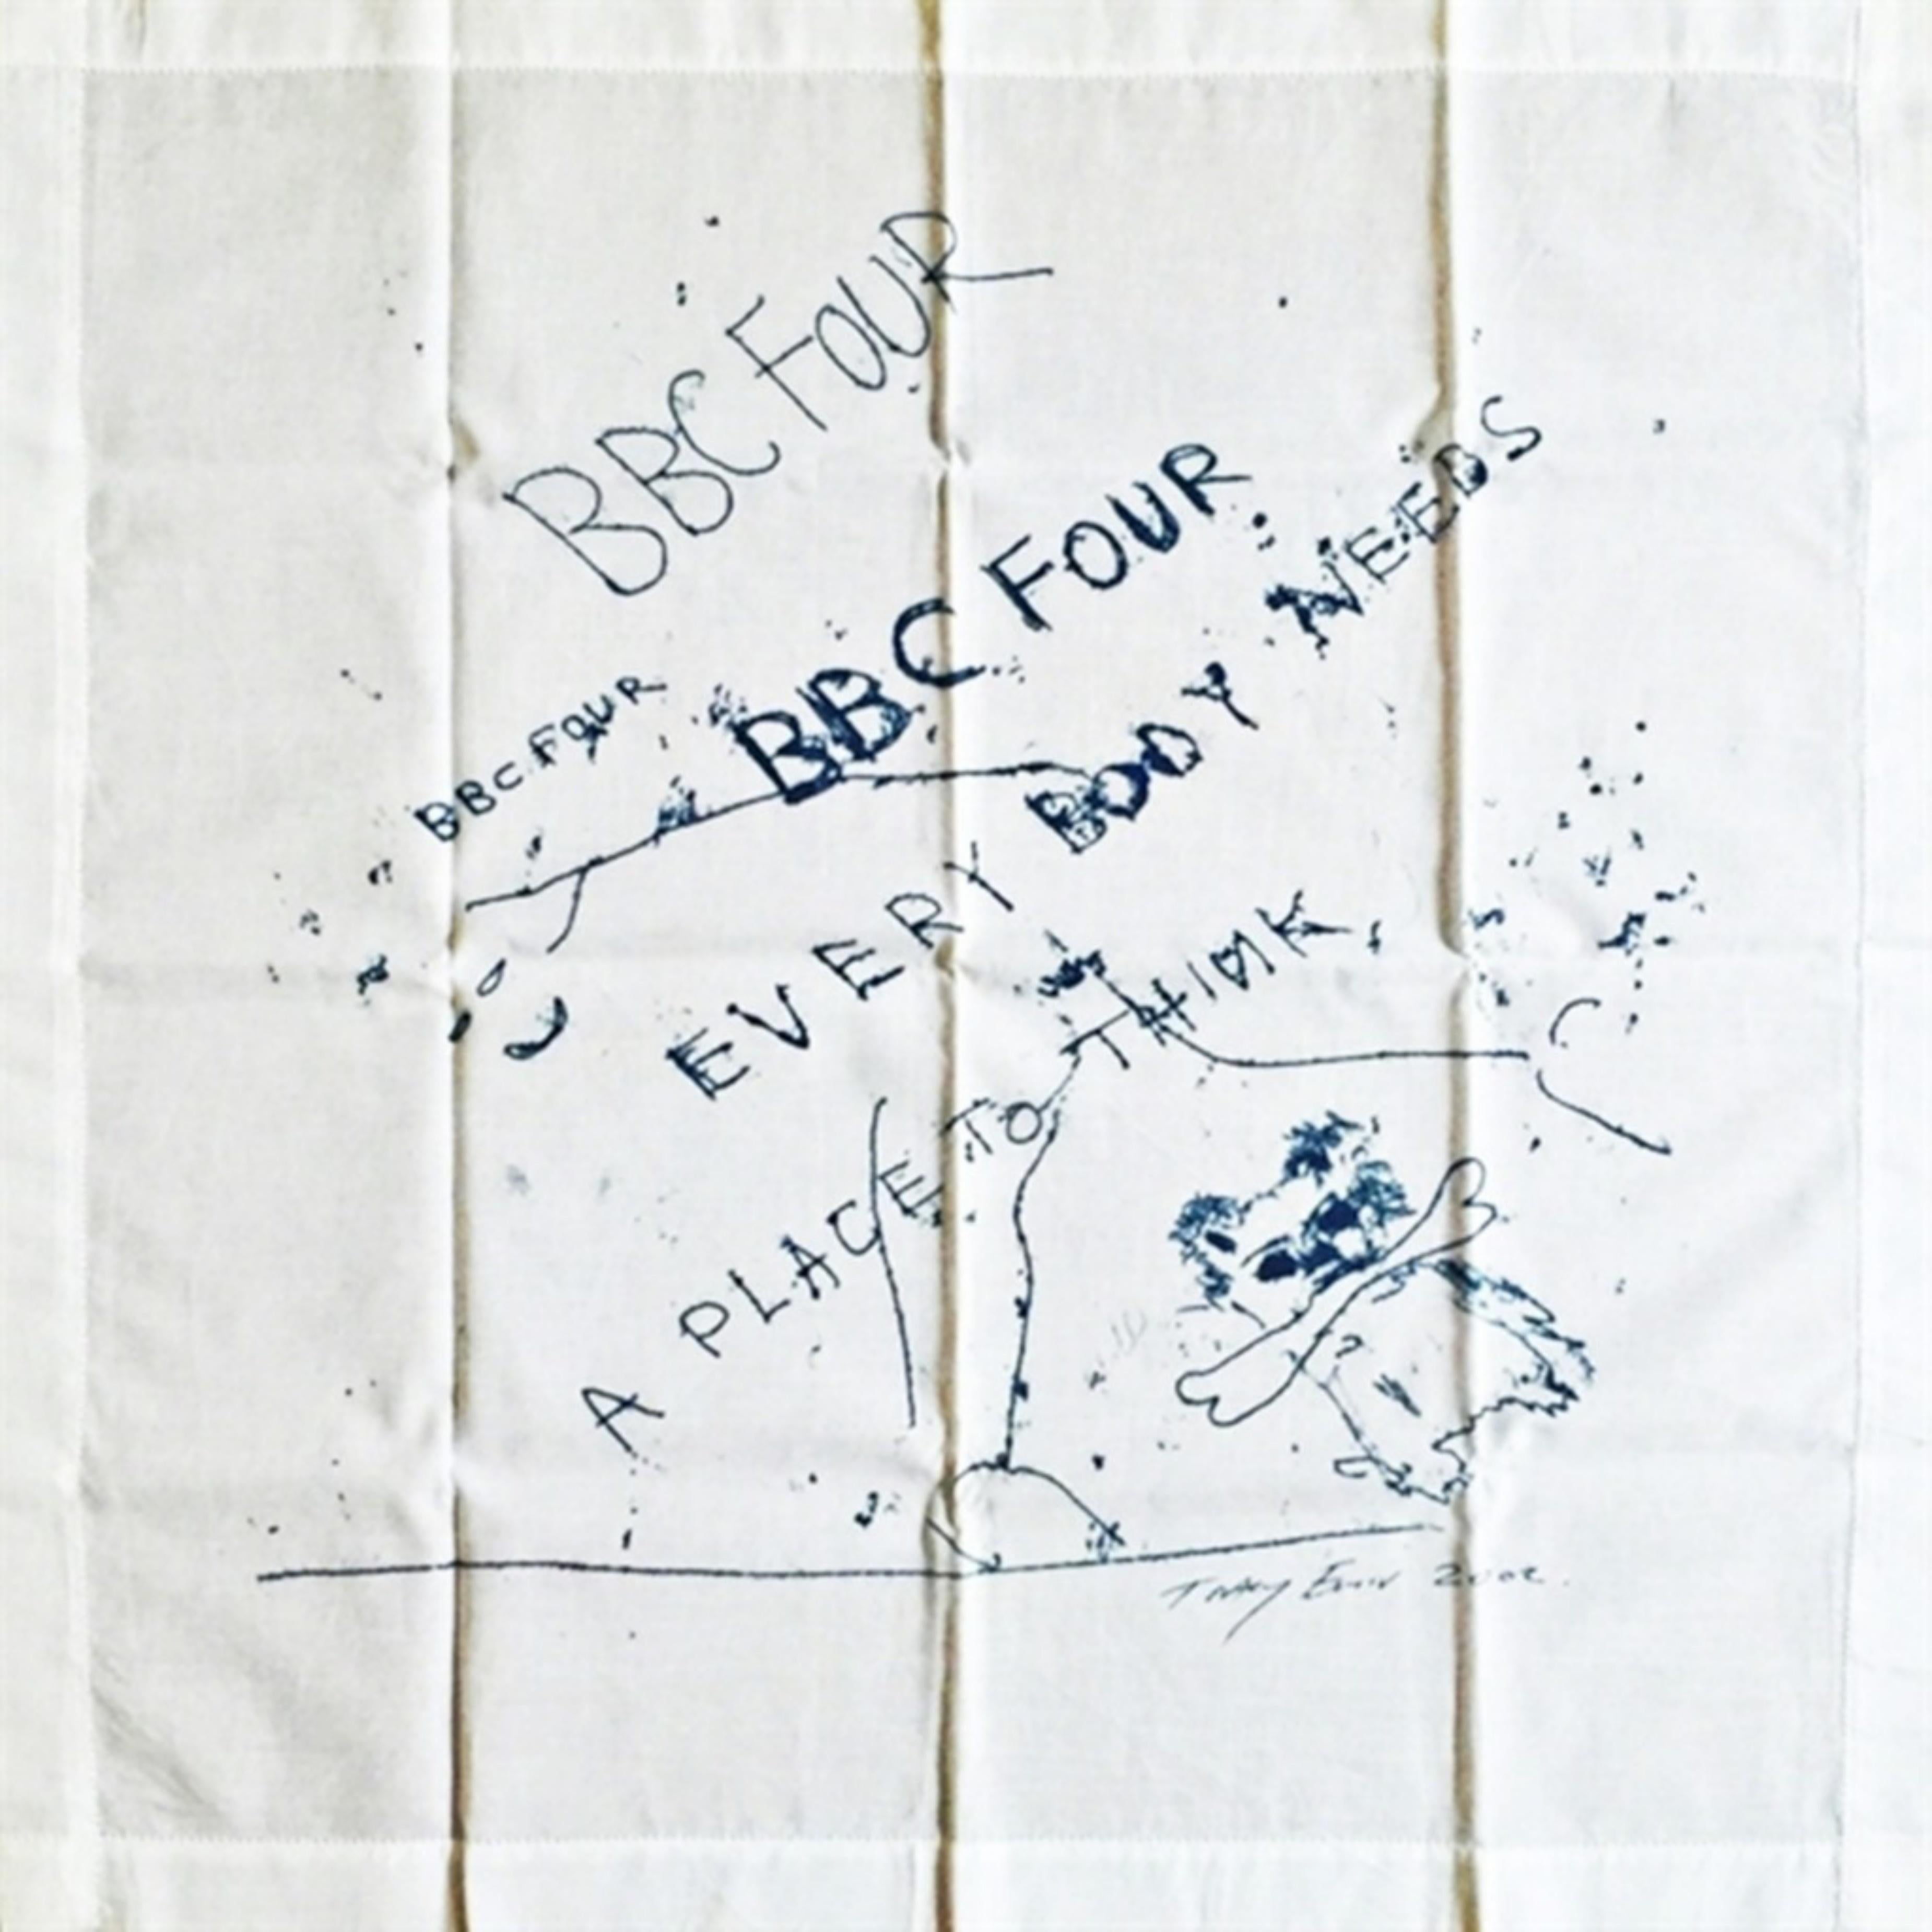 Tracey Emin Abstract Print - Everybody Needs a Place to Think (Limited Edition textile in original BBC4 box)